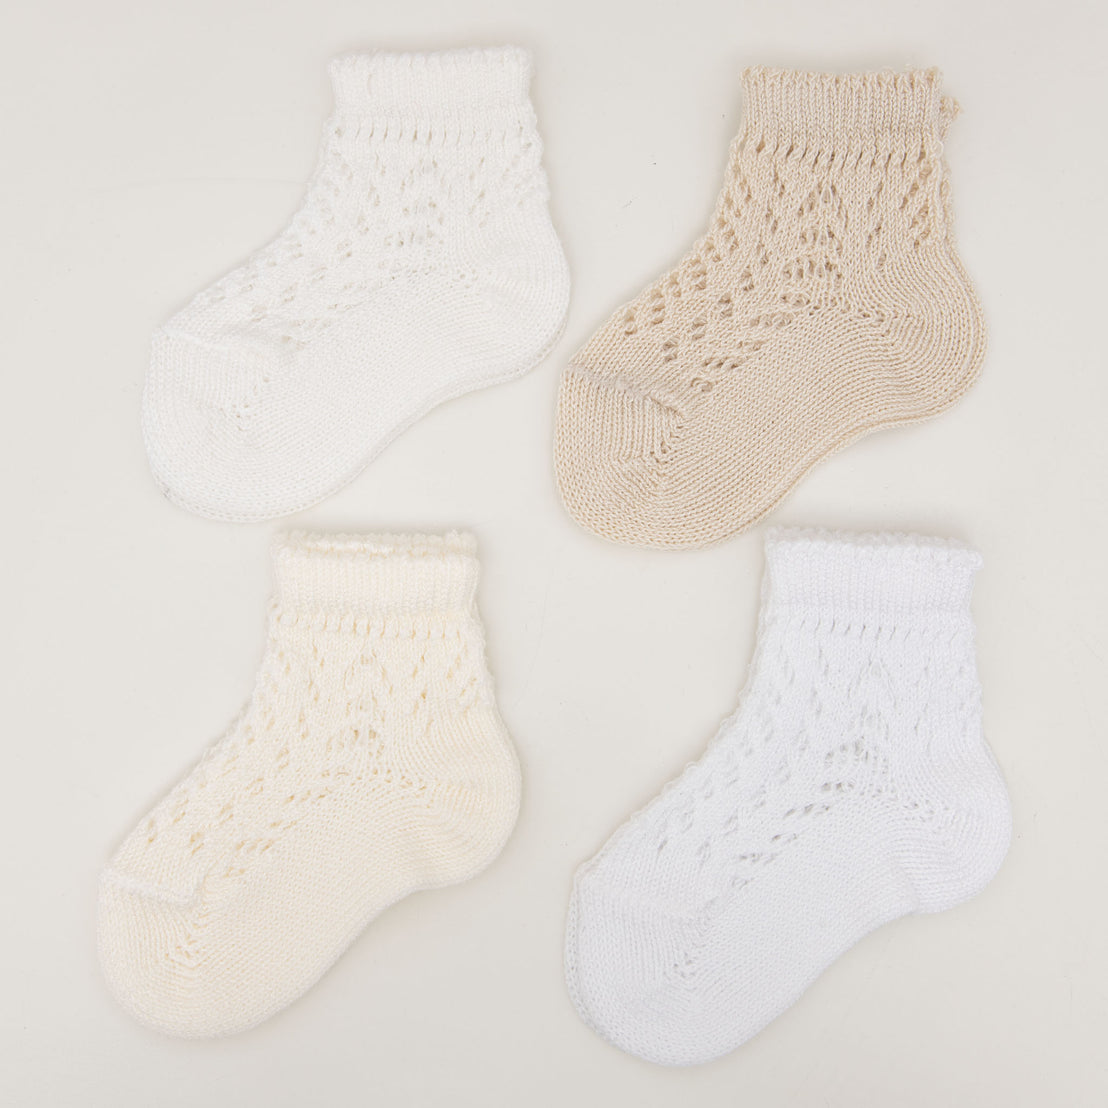 Four pairs of white Crochet Socks with different openwork patterns, displayed against a light background.